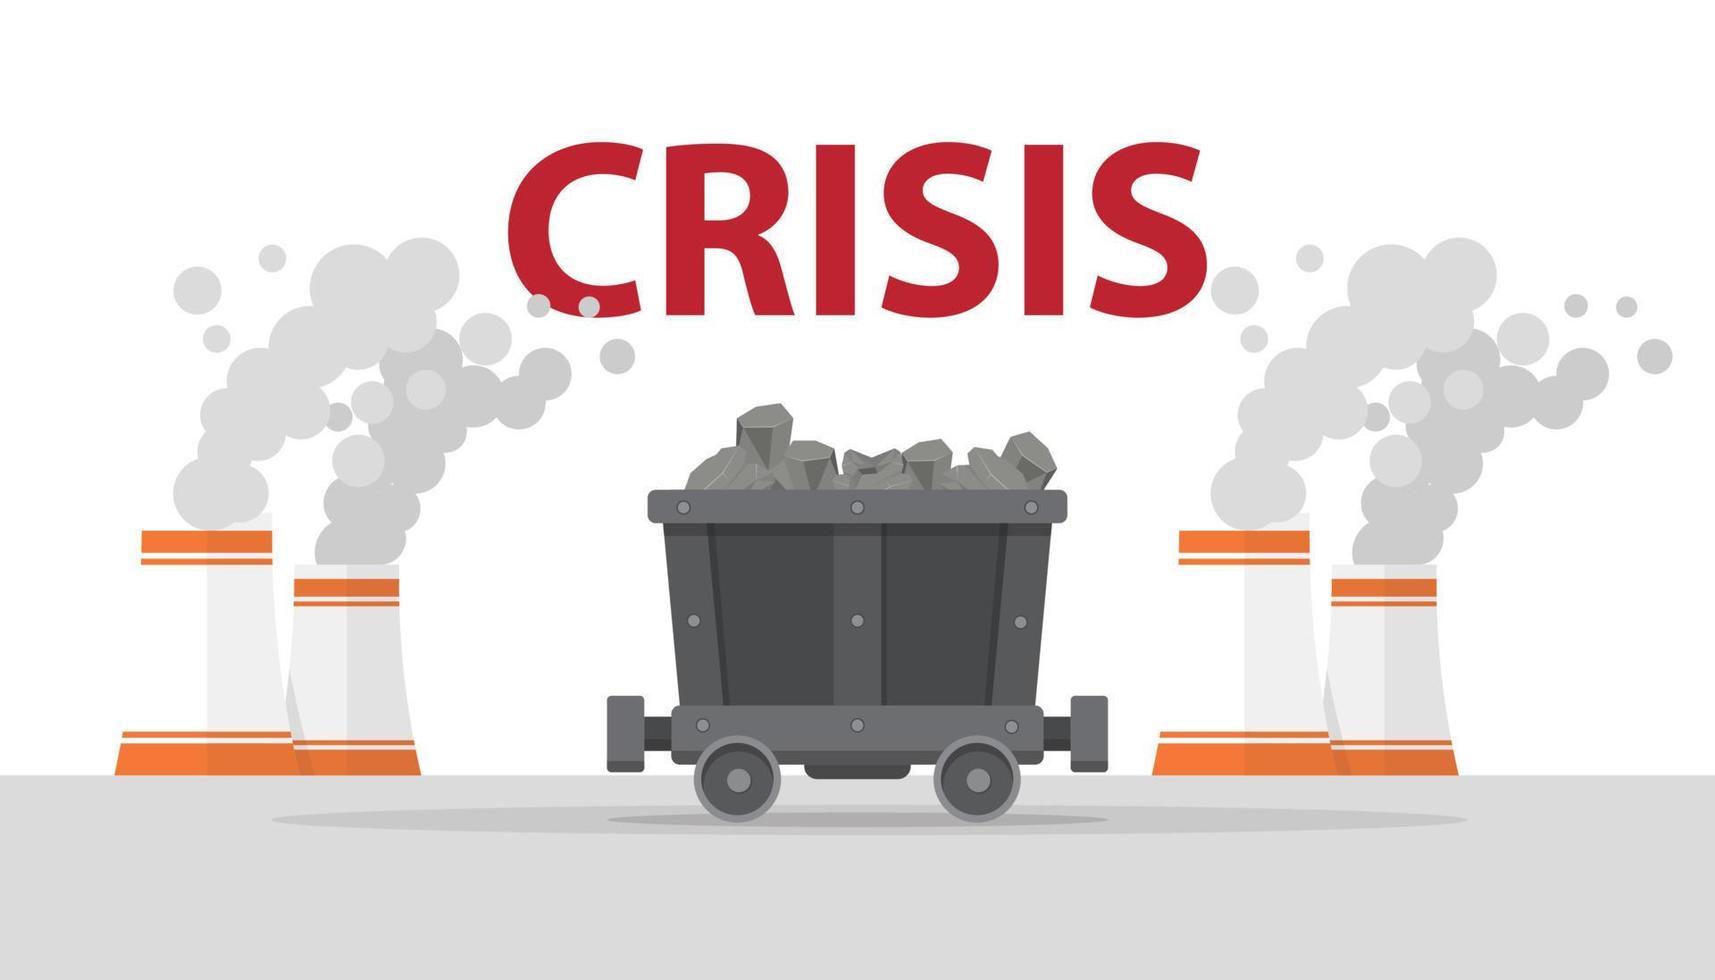 global crisis energy for coal with coal cart and factory pollution smoke with modern flat style vector